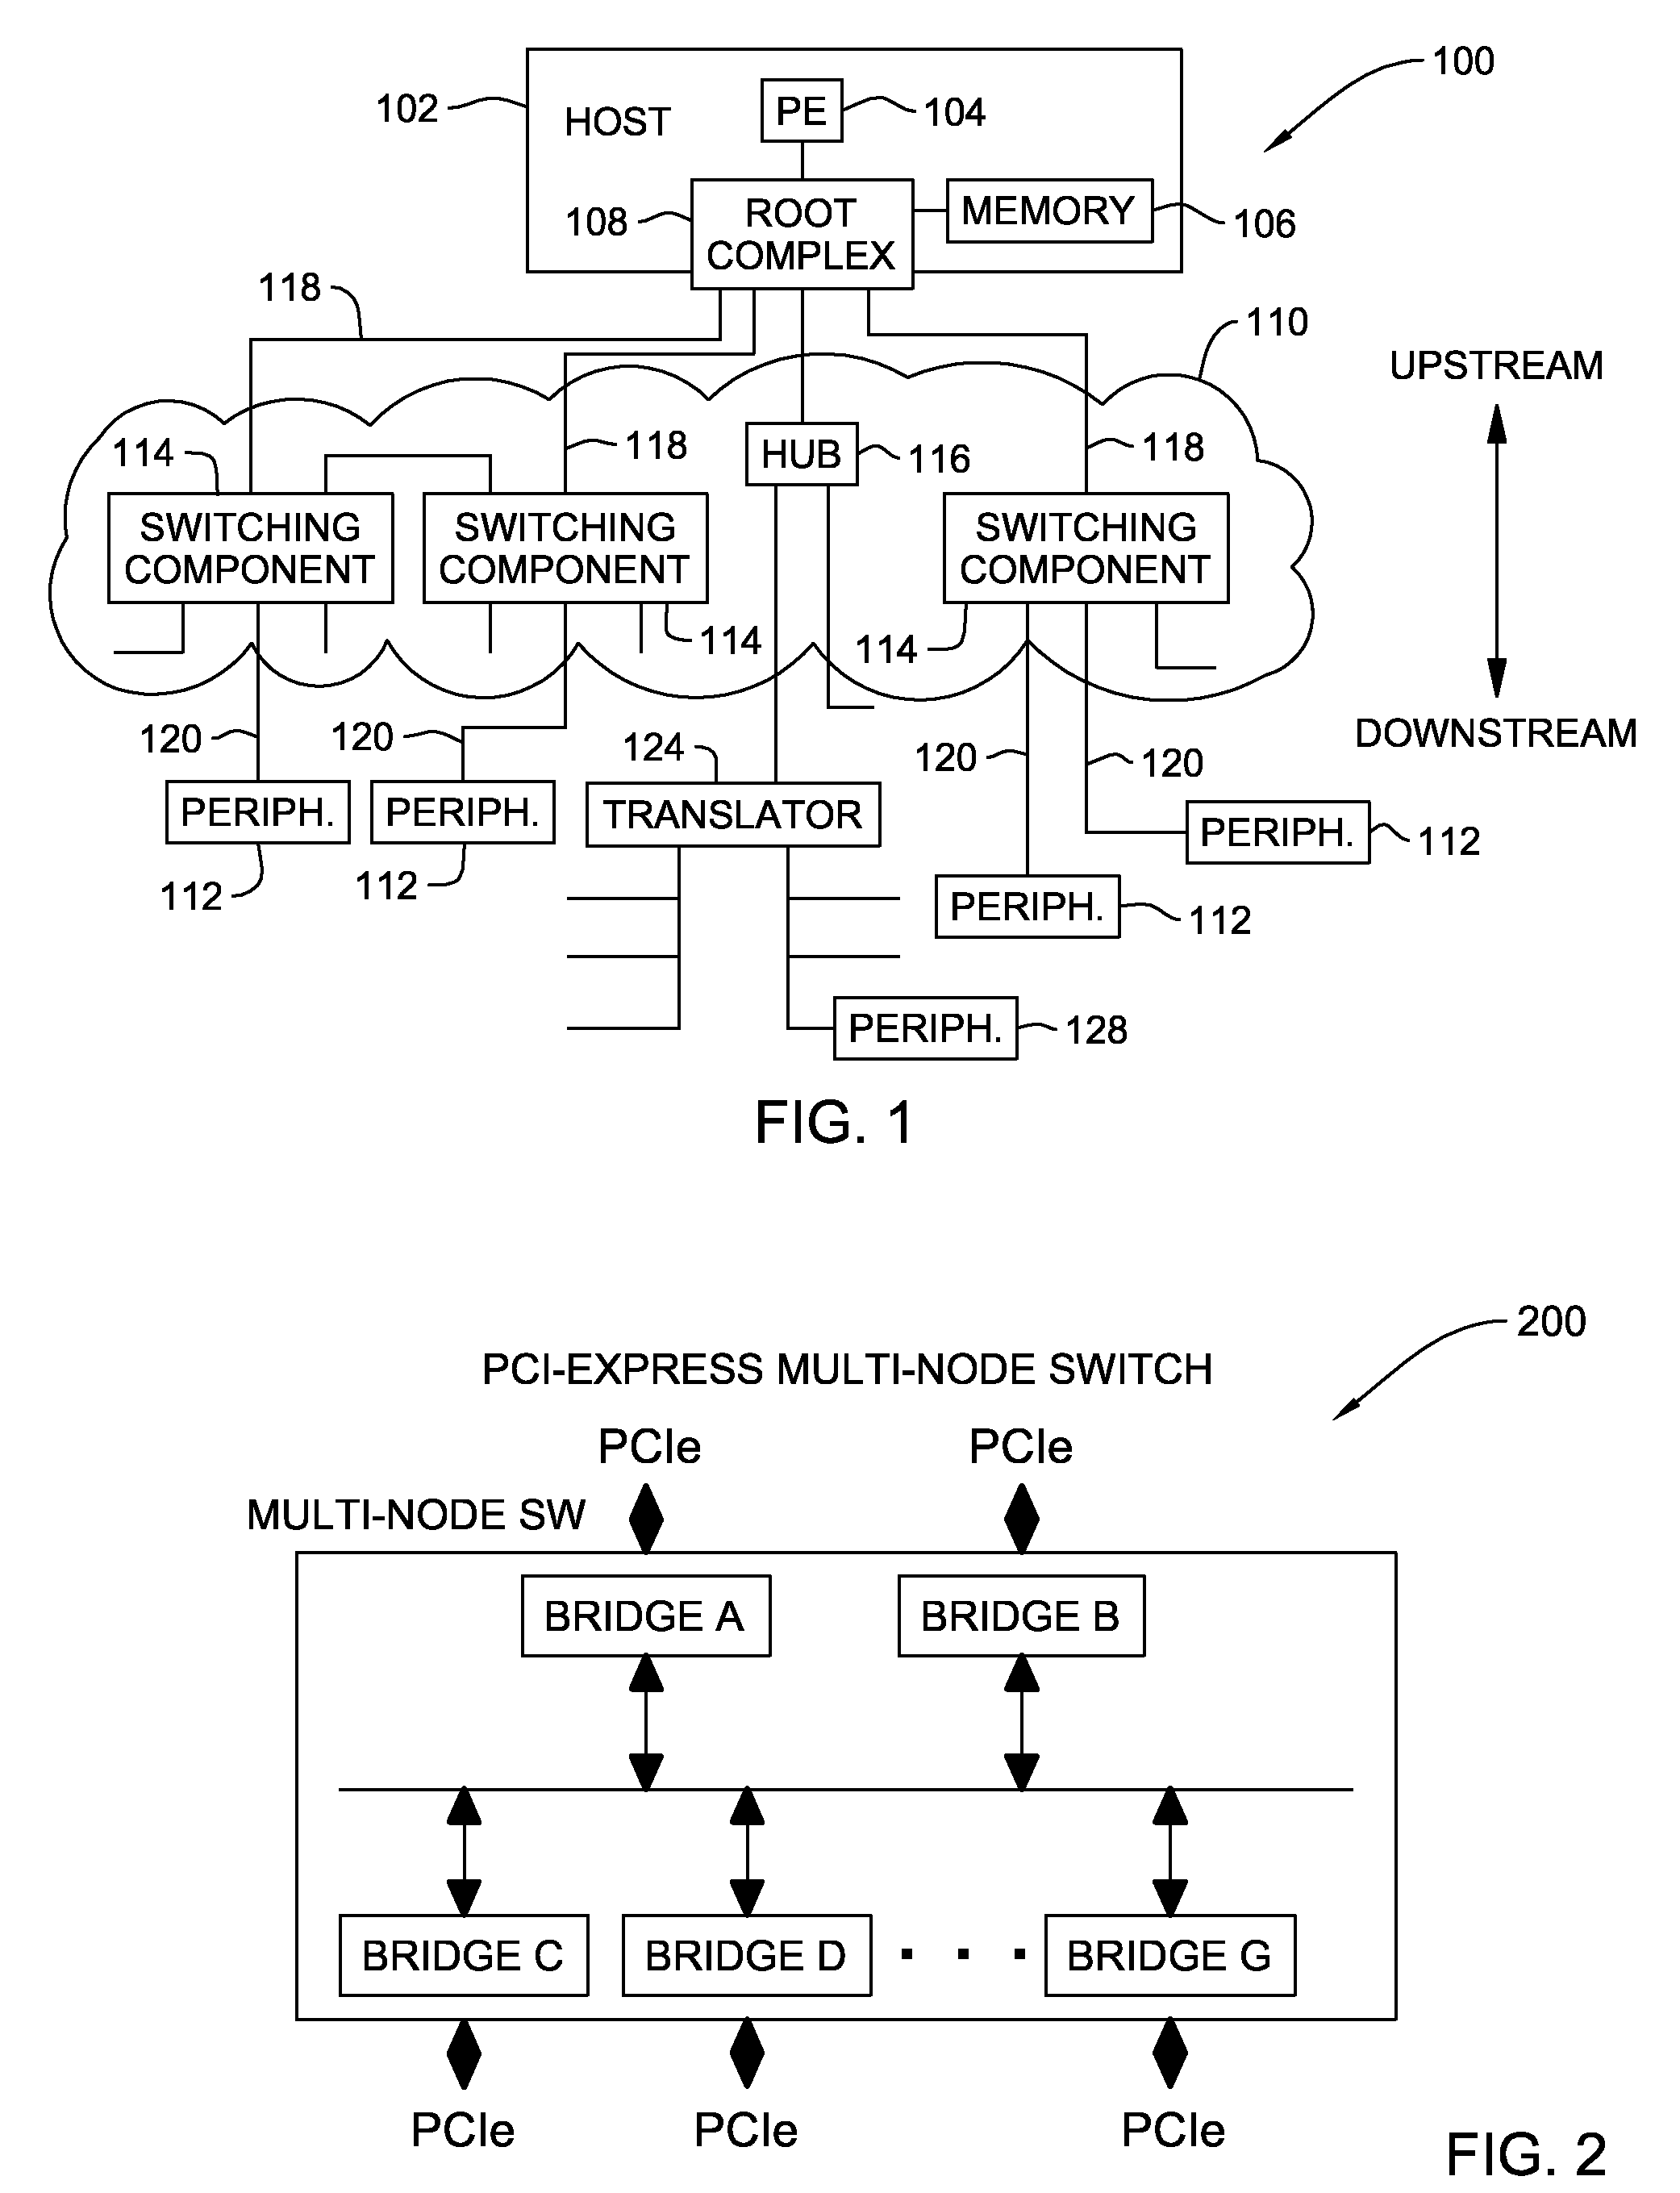 Peripheral component switch having automatic link failover